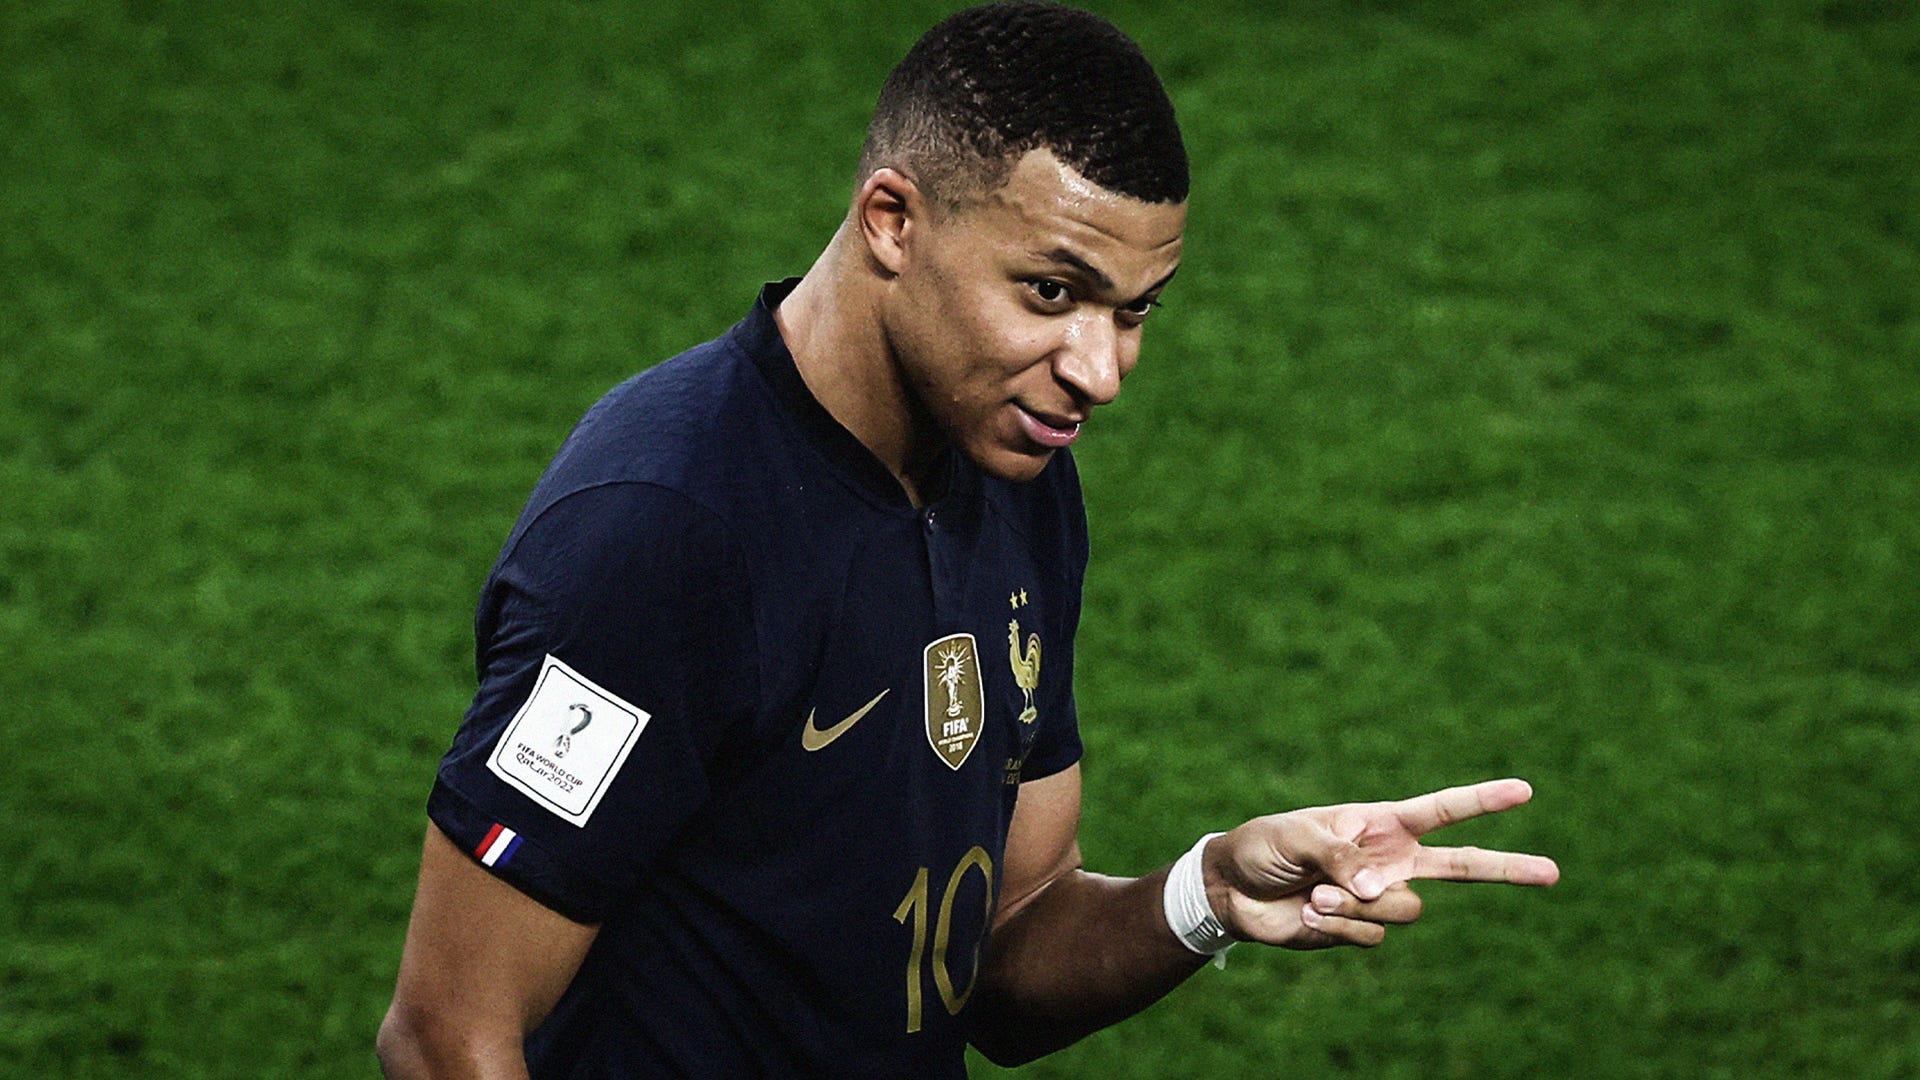 Kylian Mbappe Two World Cup wins would see France star join Messi, Maradona and Pele in the GOAT debate Goal